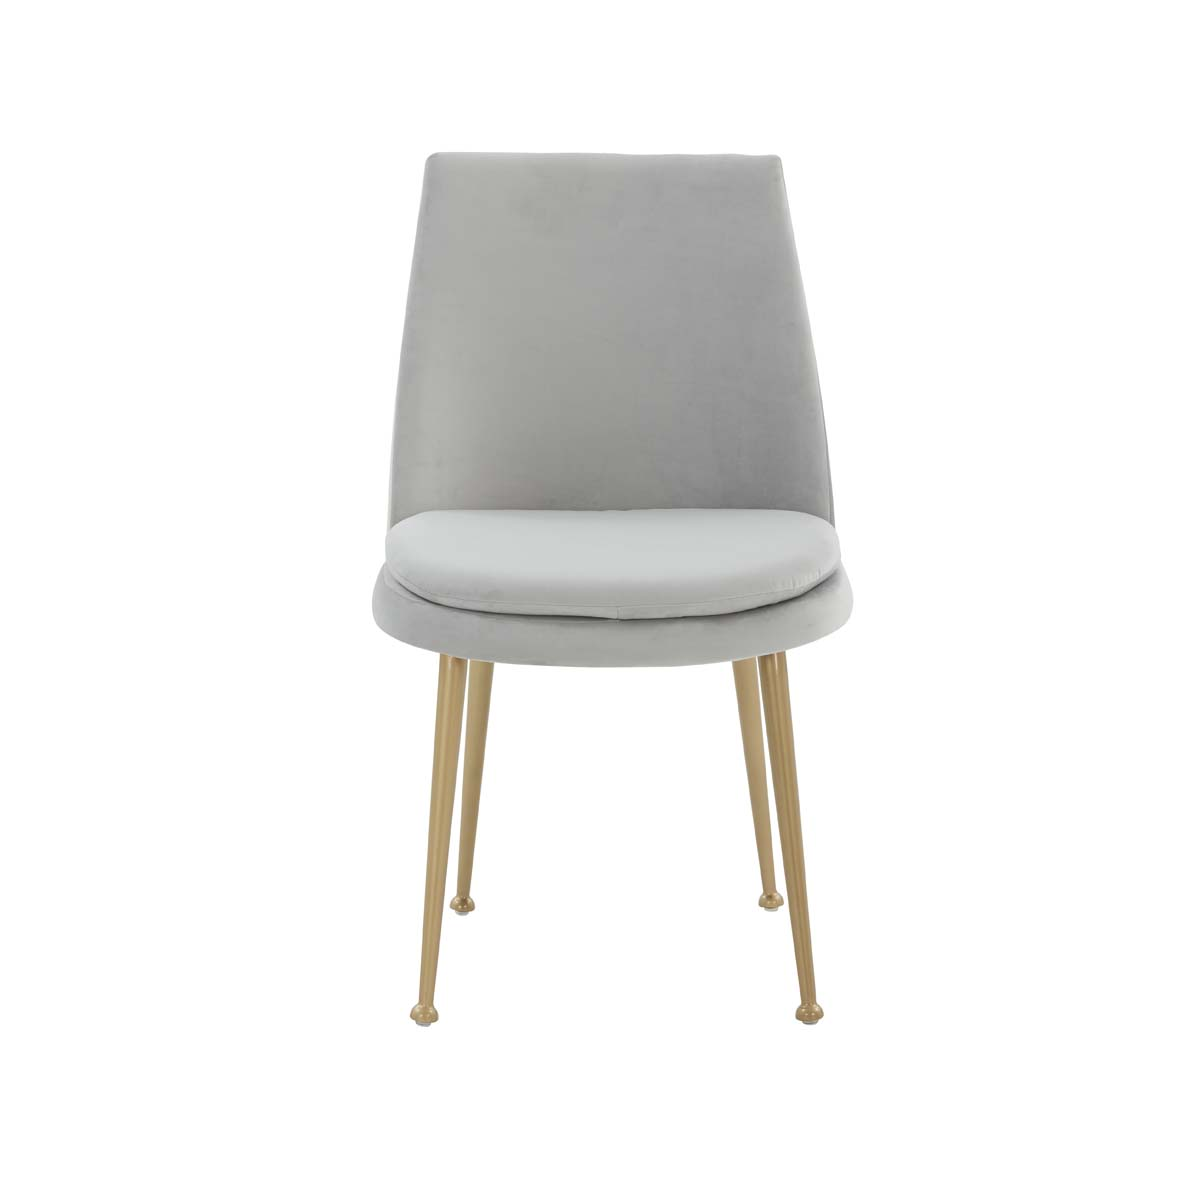 Safavieh Couture Rynaldo Upholstered Dining Chair